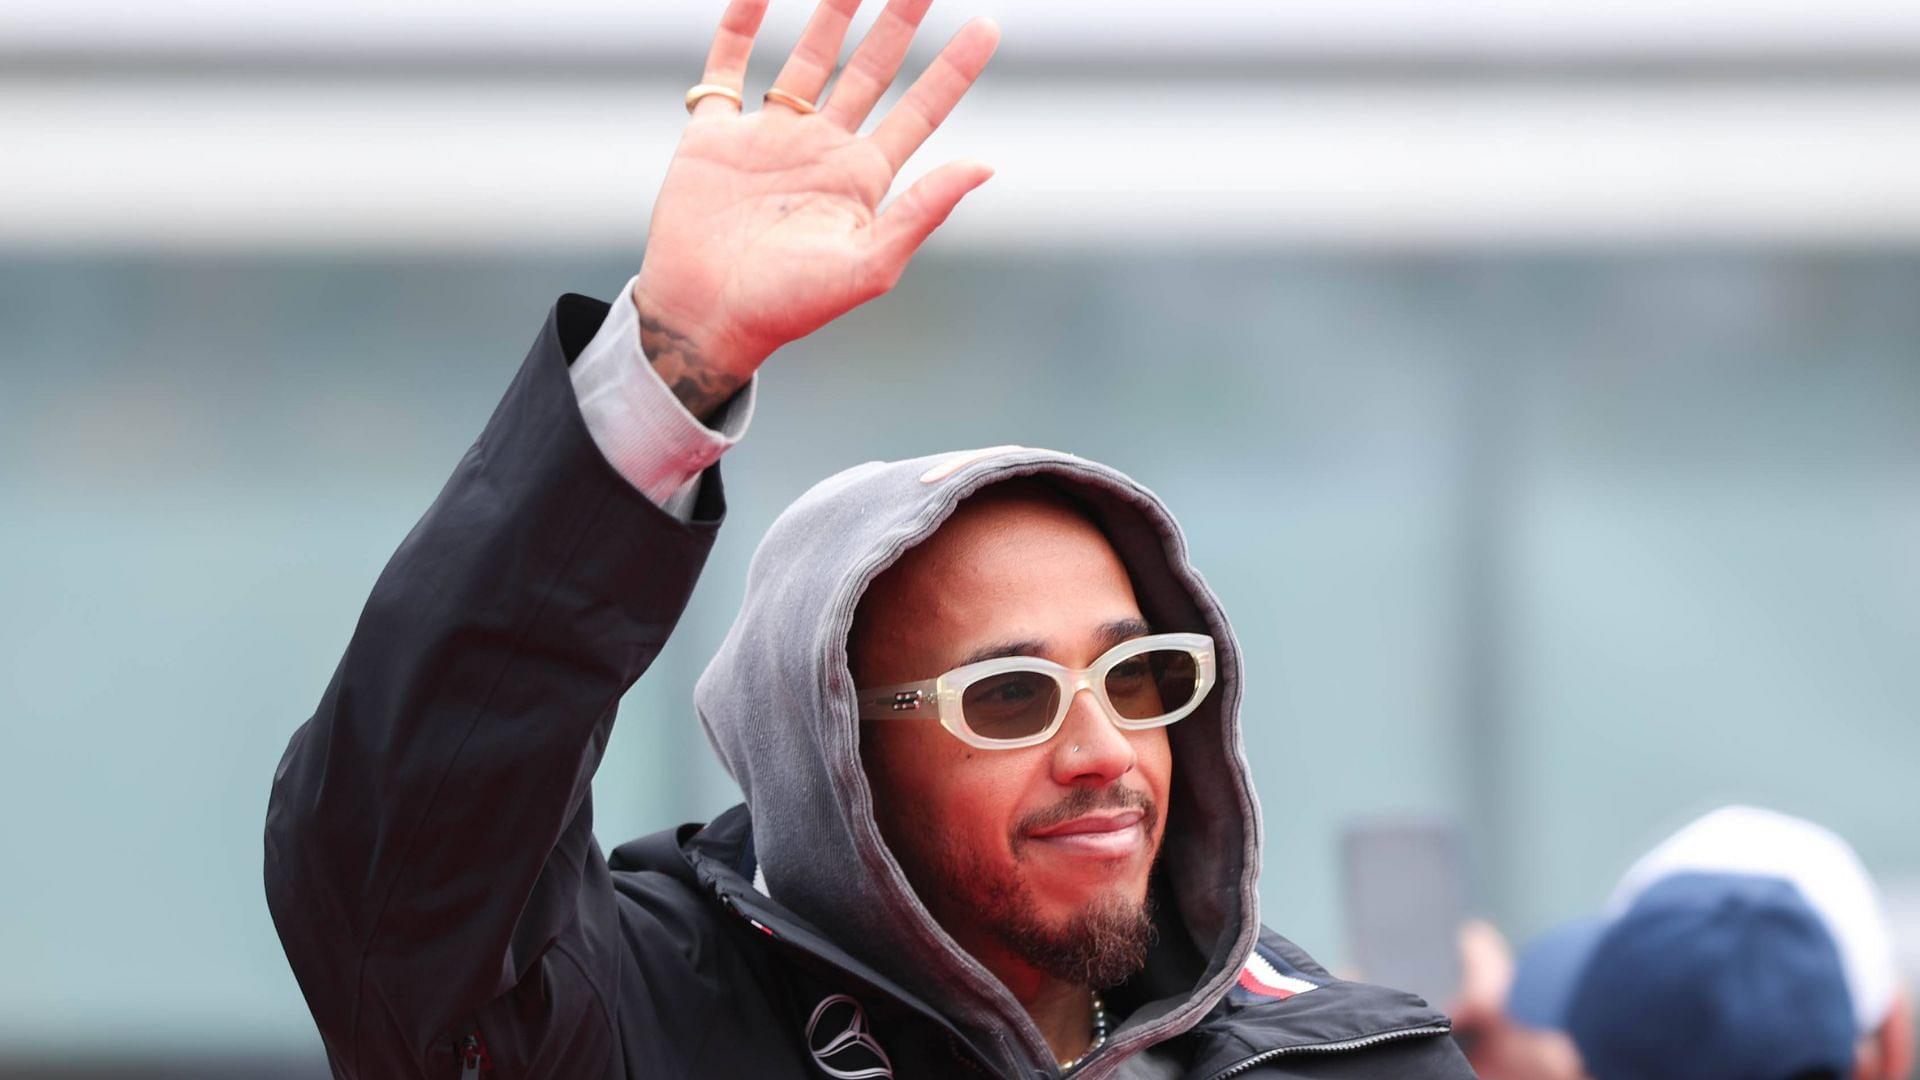 Lewis Hamilton Was Once Hailed as Greatest British Sportsperson by Former Premier League Star